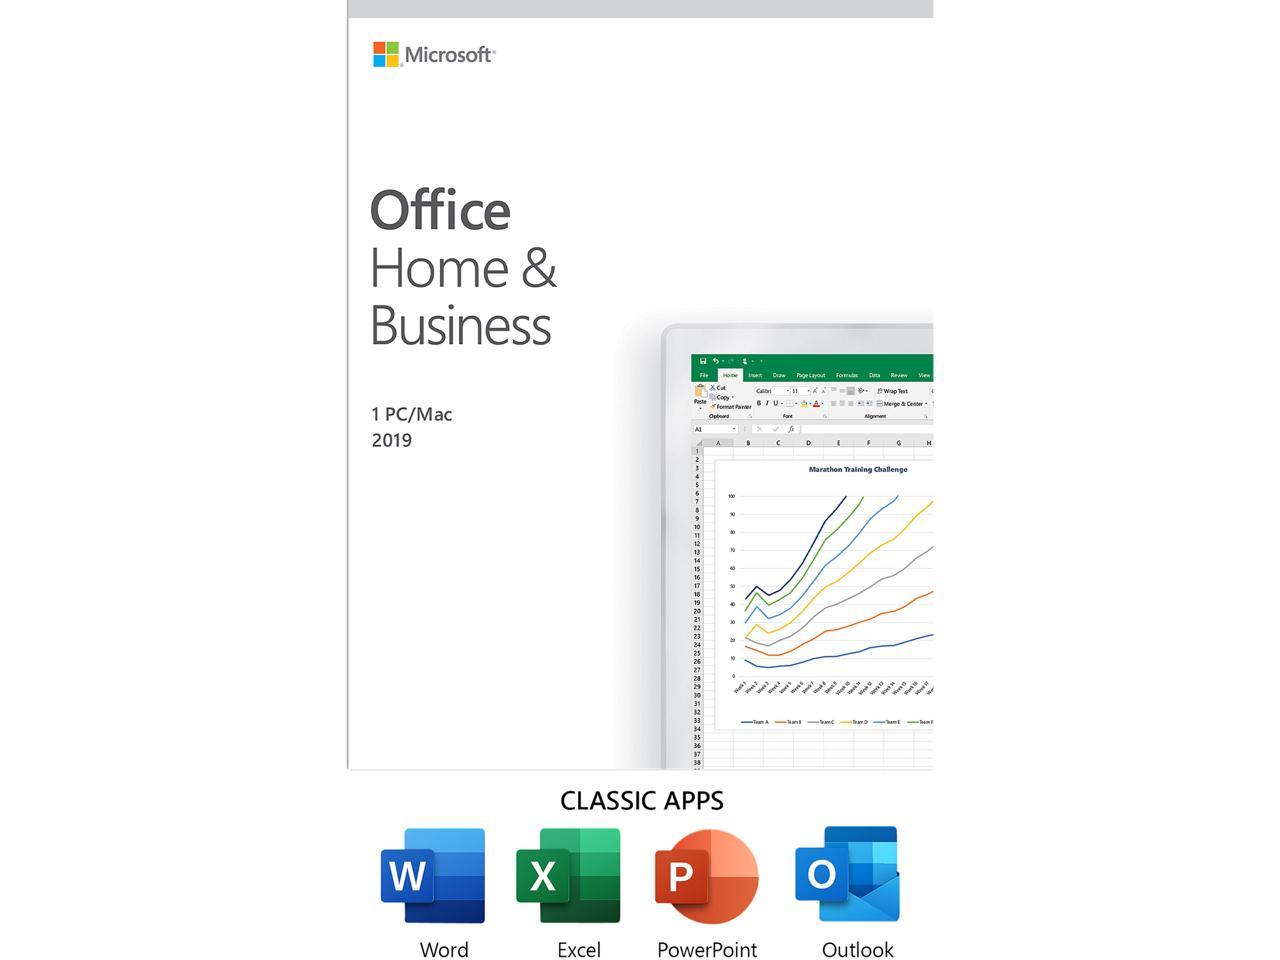 microsoft office one time purchase for mac